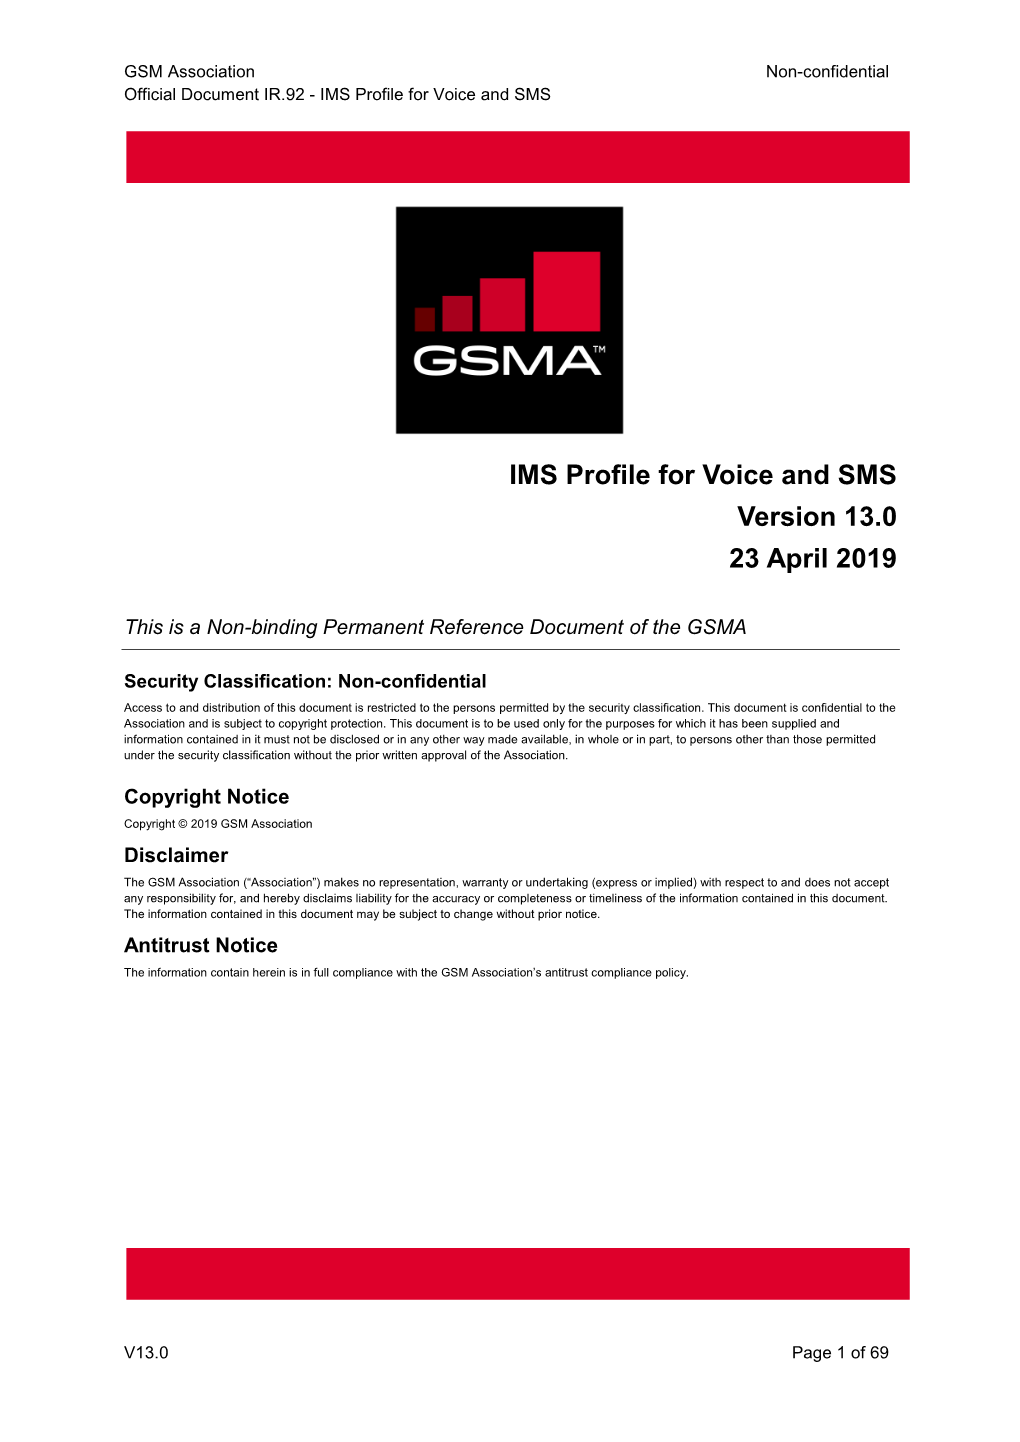 IMS Profile for Voice and SMS Version 13.0 23 April 2019